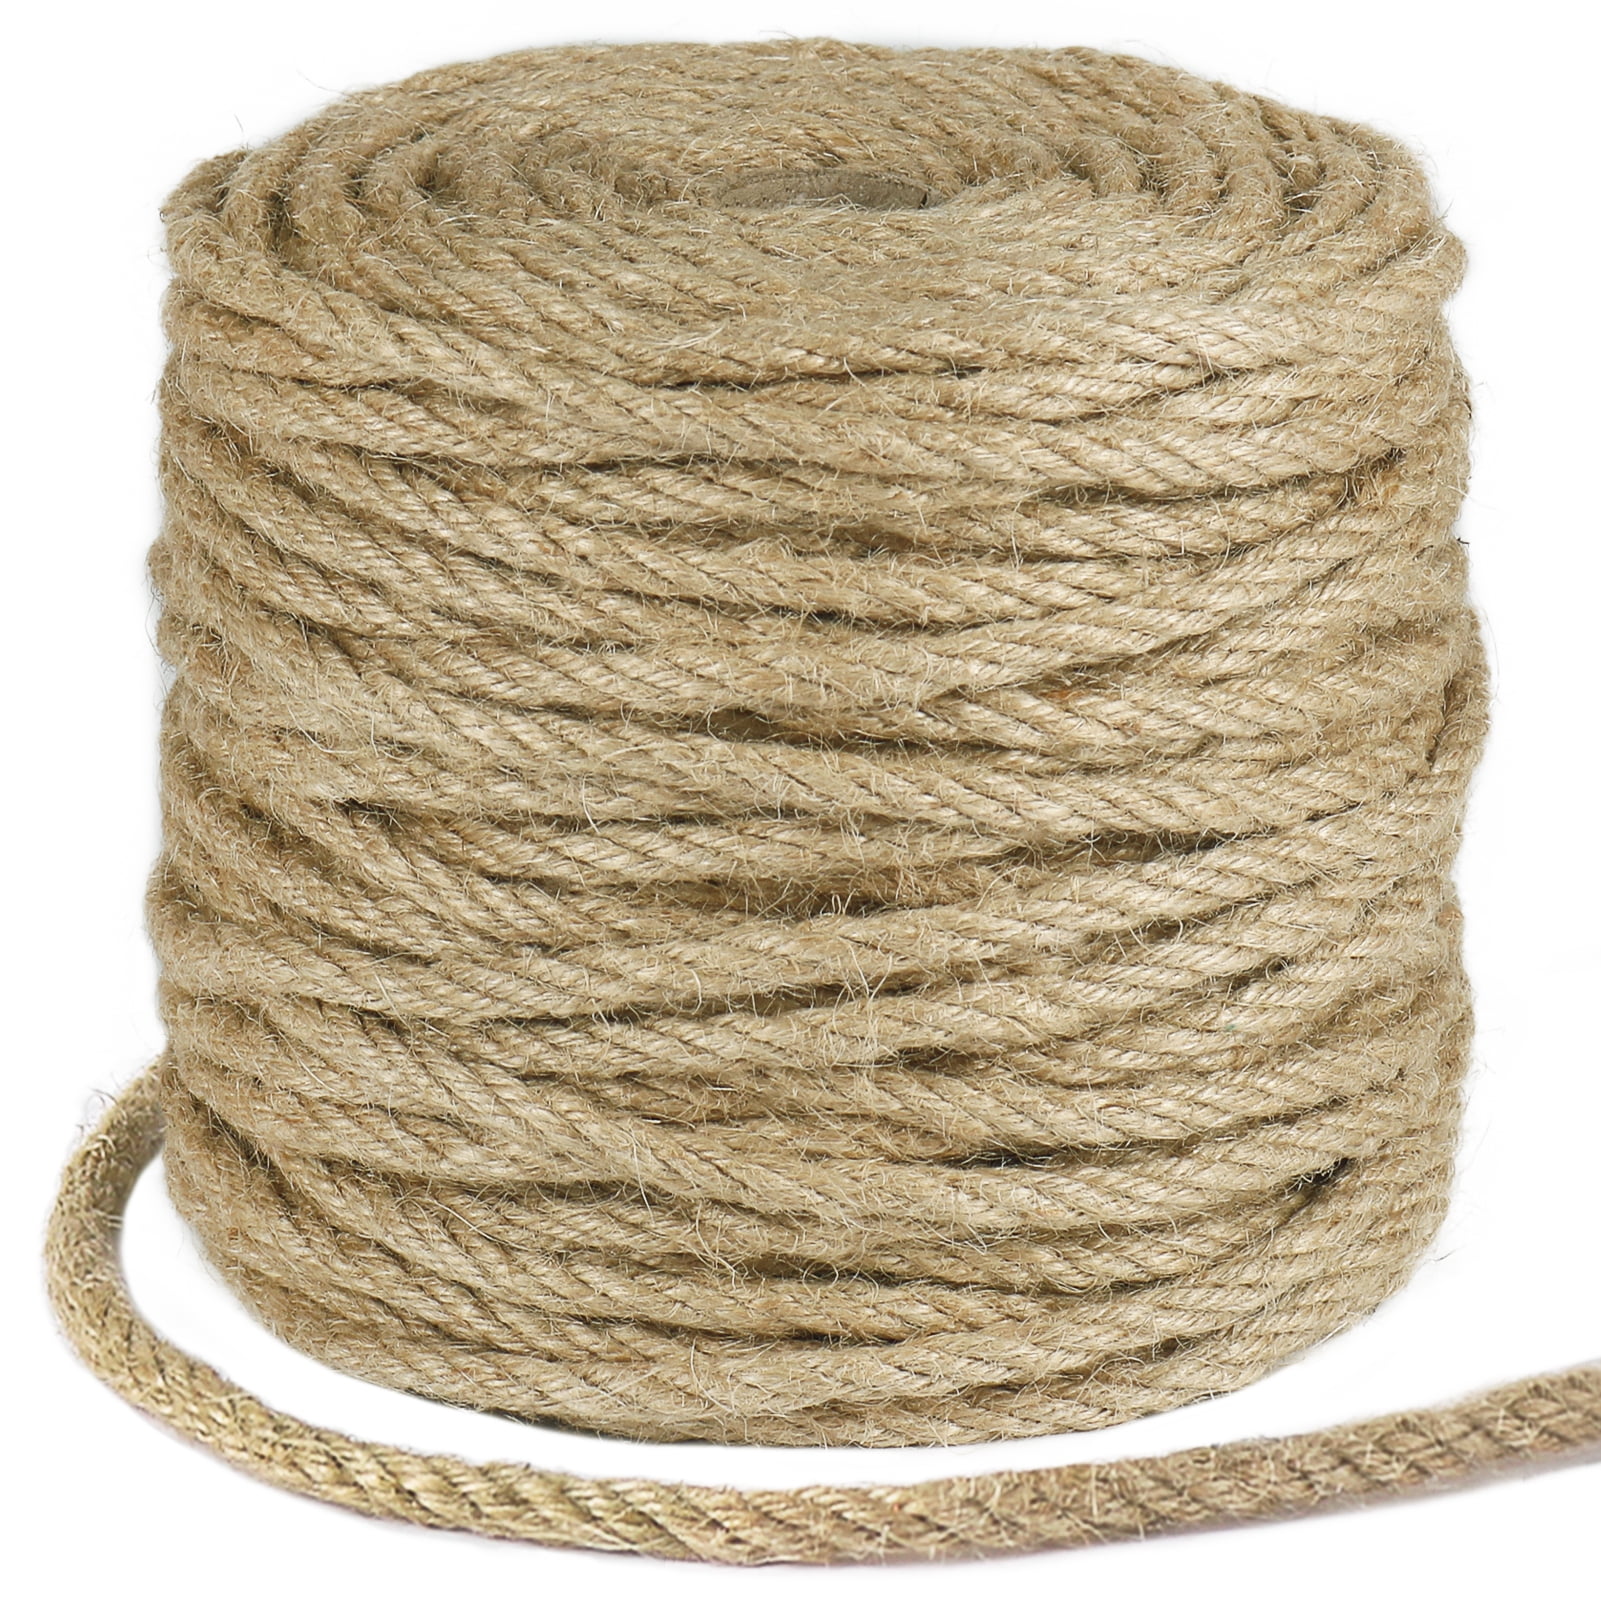 Twisted 3 Strand Natural Cotton Rope 40 and 100 Foot Kits in 1/4